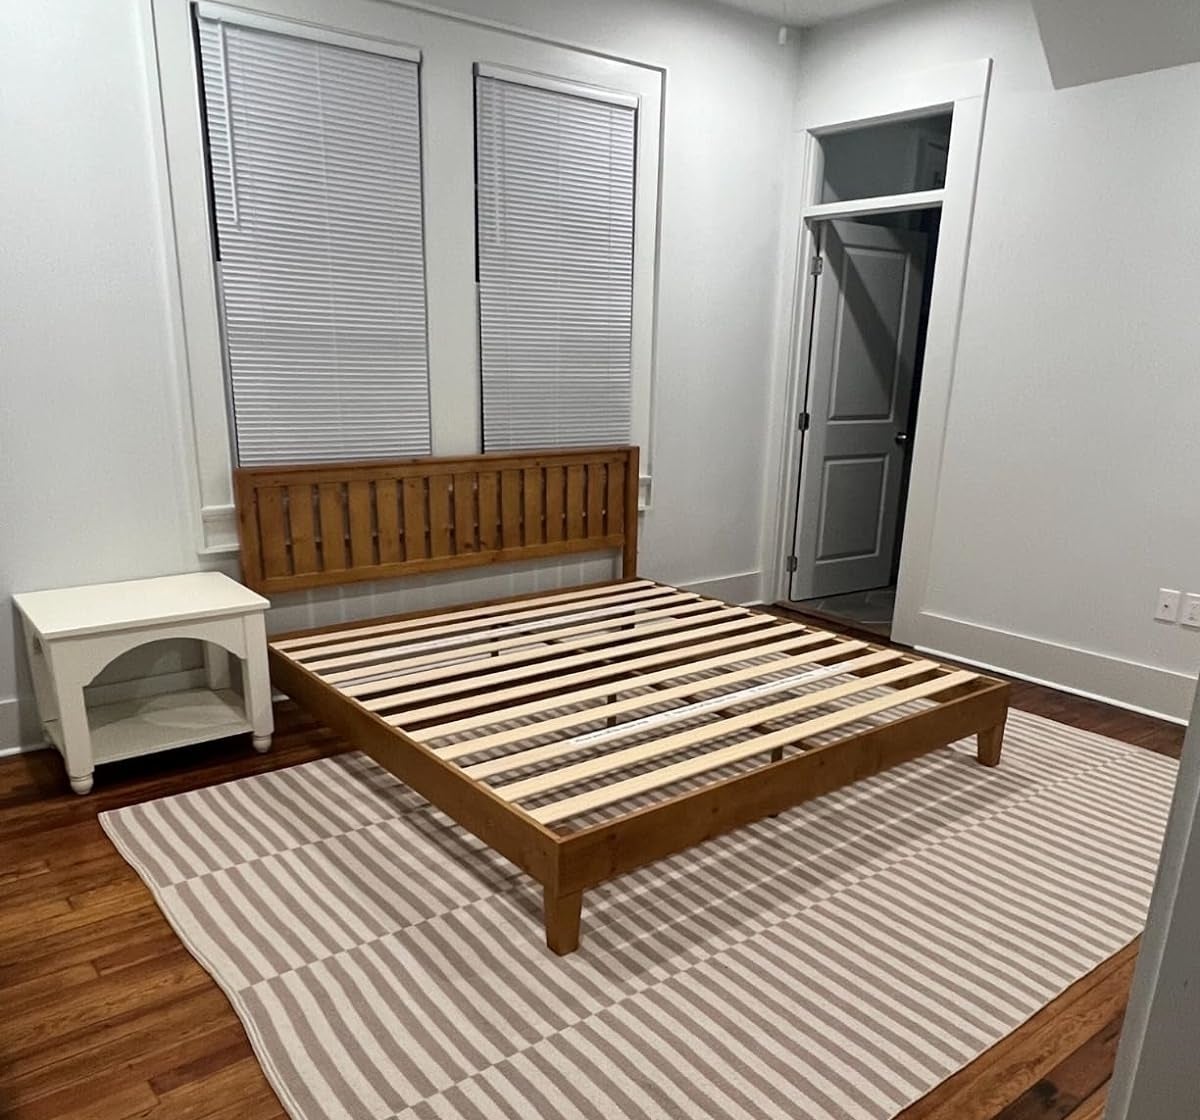 A minimalist bedroom with an unassembled wooden bed frame, a small bench, and a striped rug